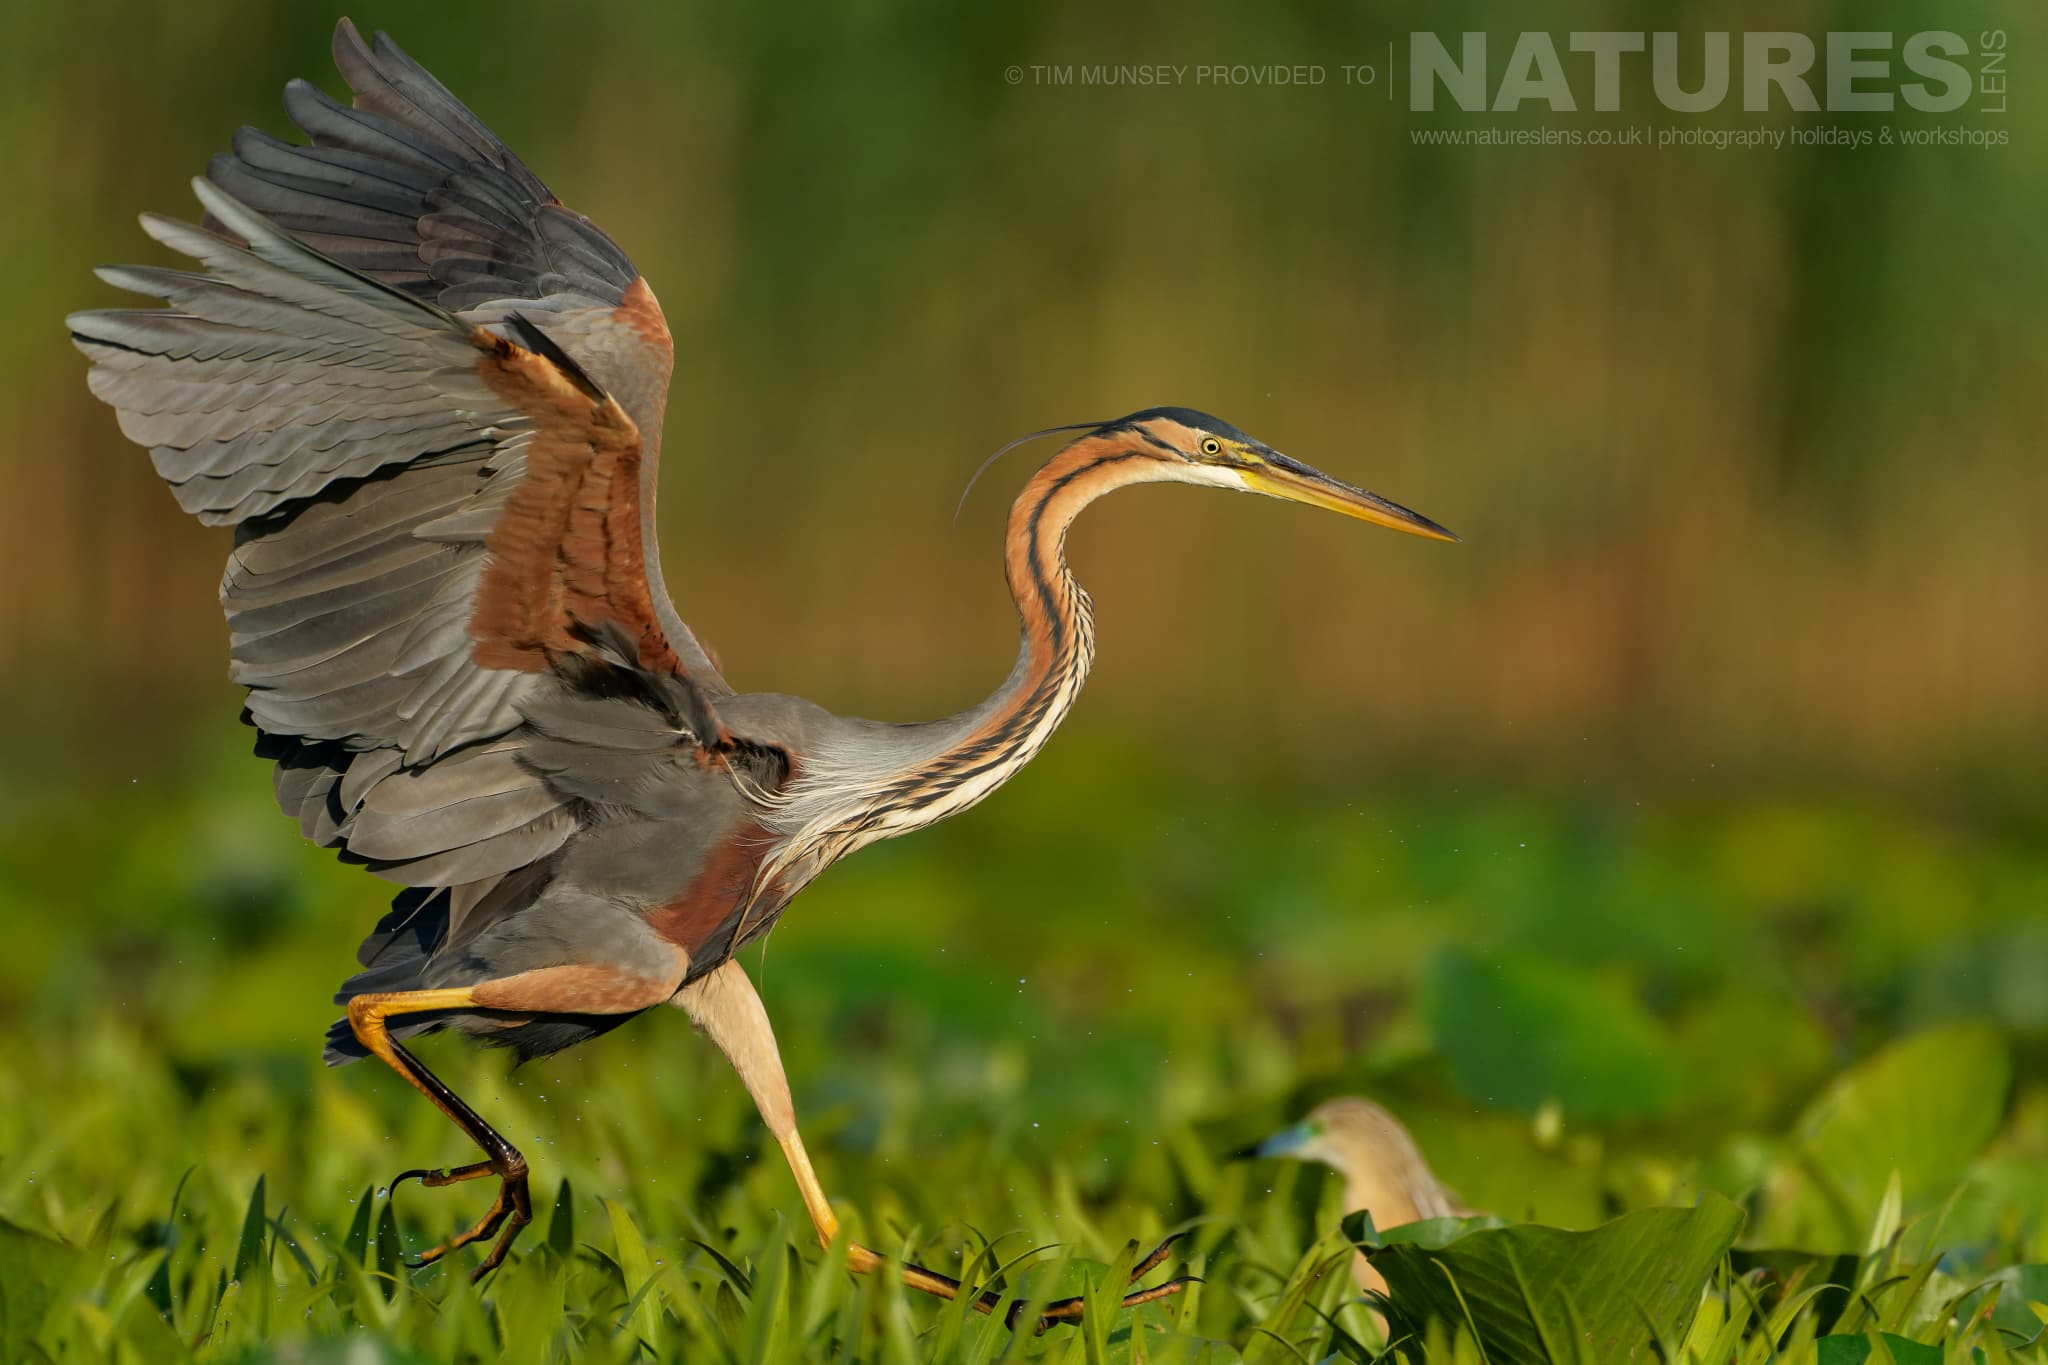 A Purple Heron Wades In The Delta One Of The Species That Features On The Natureslens Birds Of The Danube Delta Photography Holiday